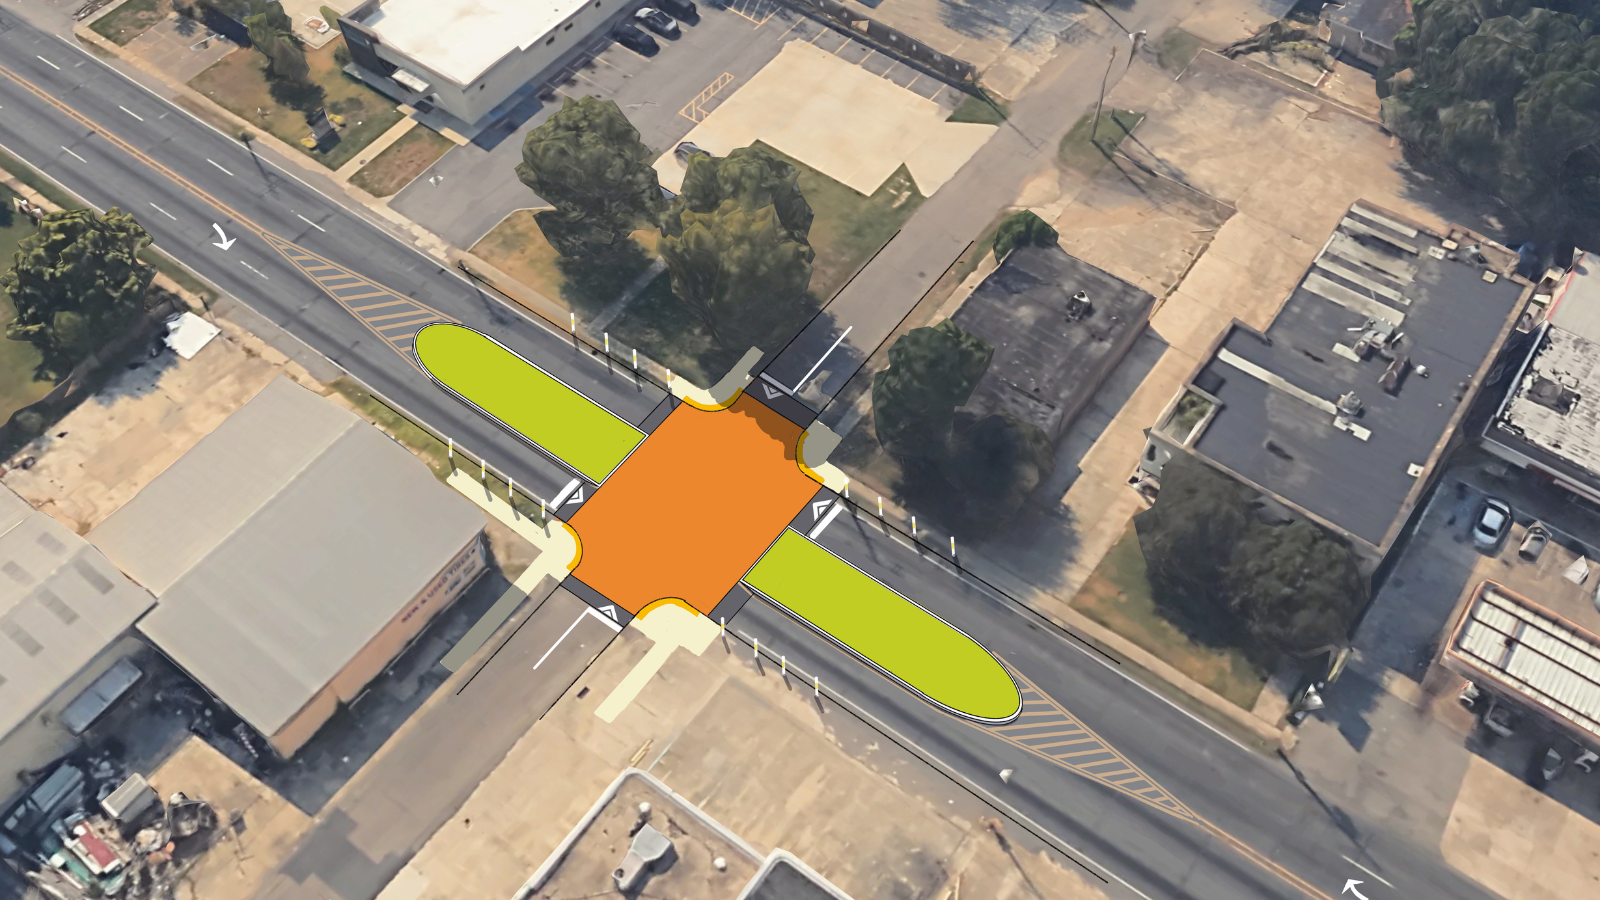 The four-lane road is reduced to single lanes of travel in both directions, plus a wide median and massive crosswalk enhance pedestrian comfort as they cross